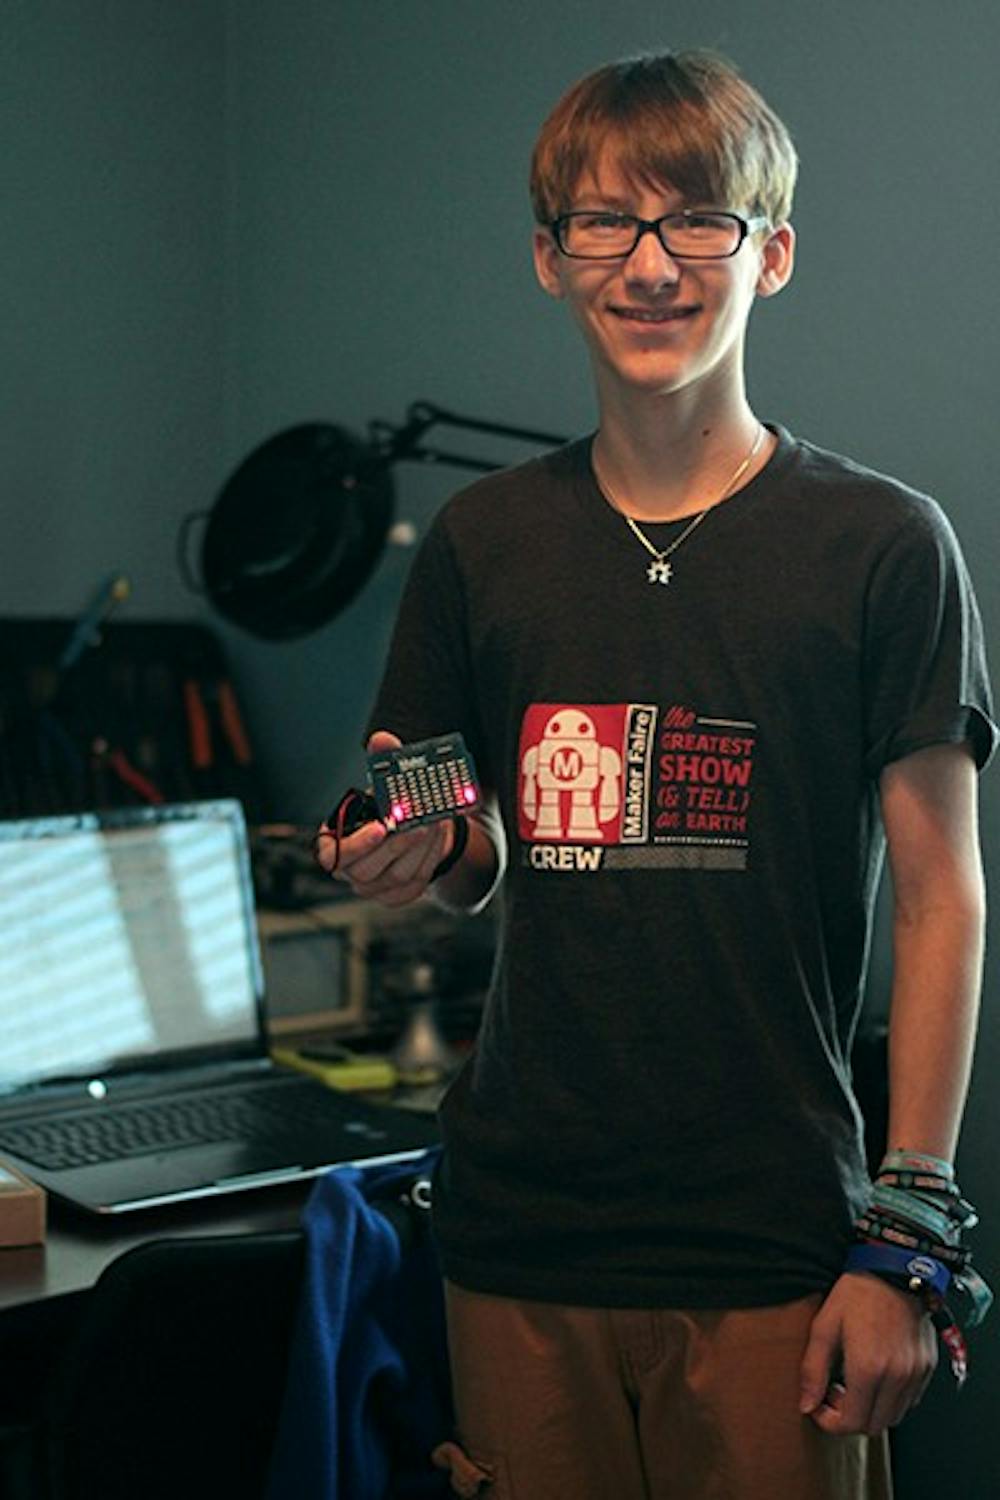 Joey Hudy, a 16-year-old Herberger Academy student, is the youngest person to get a job at Intel and will in the summer. He poses with his SMD LED Arduino shield, a creation he said he is proud of. (Photo by Alexis Macklin)